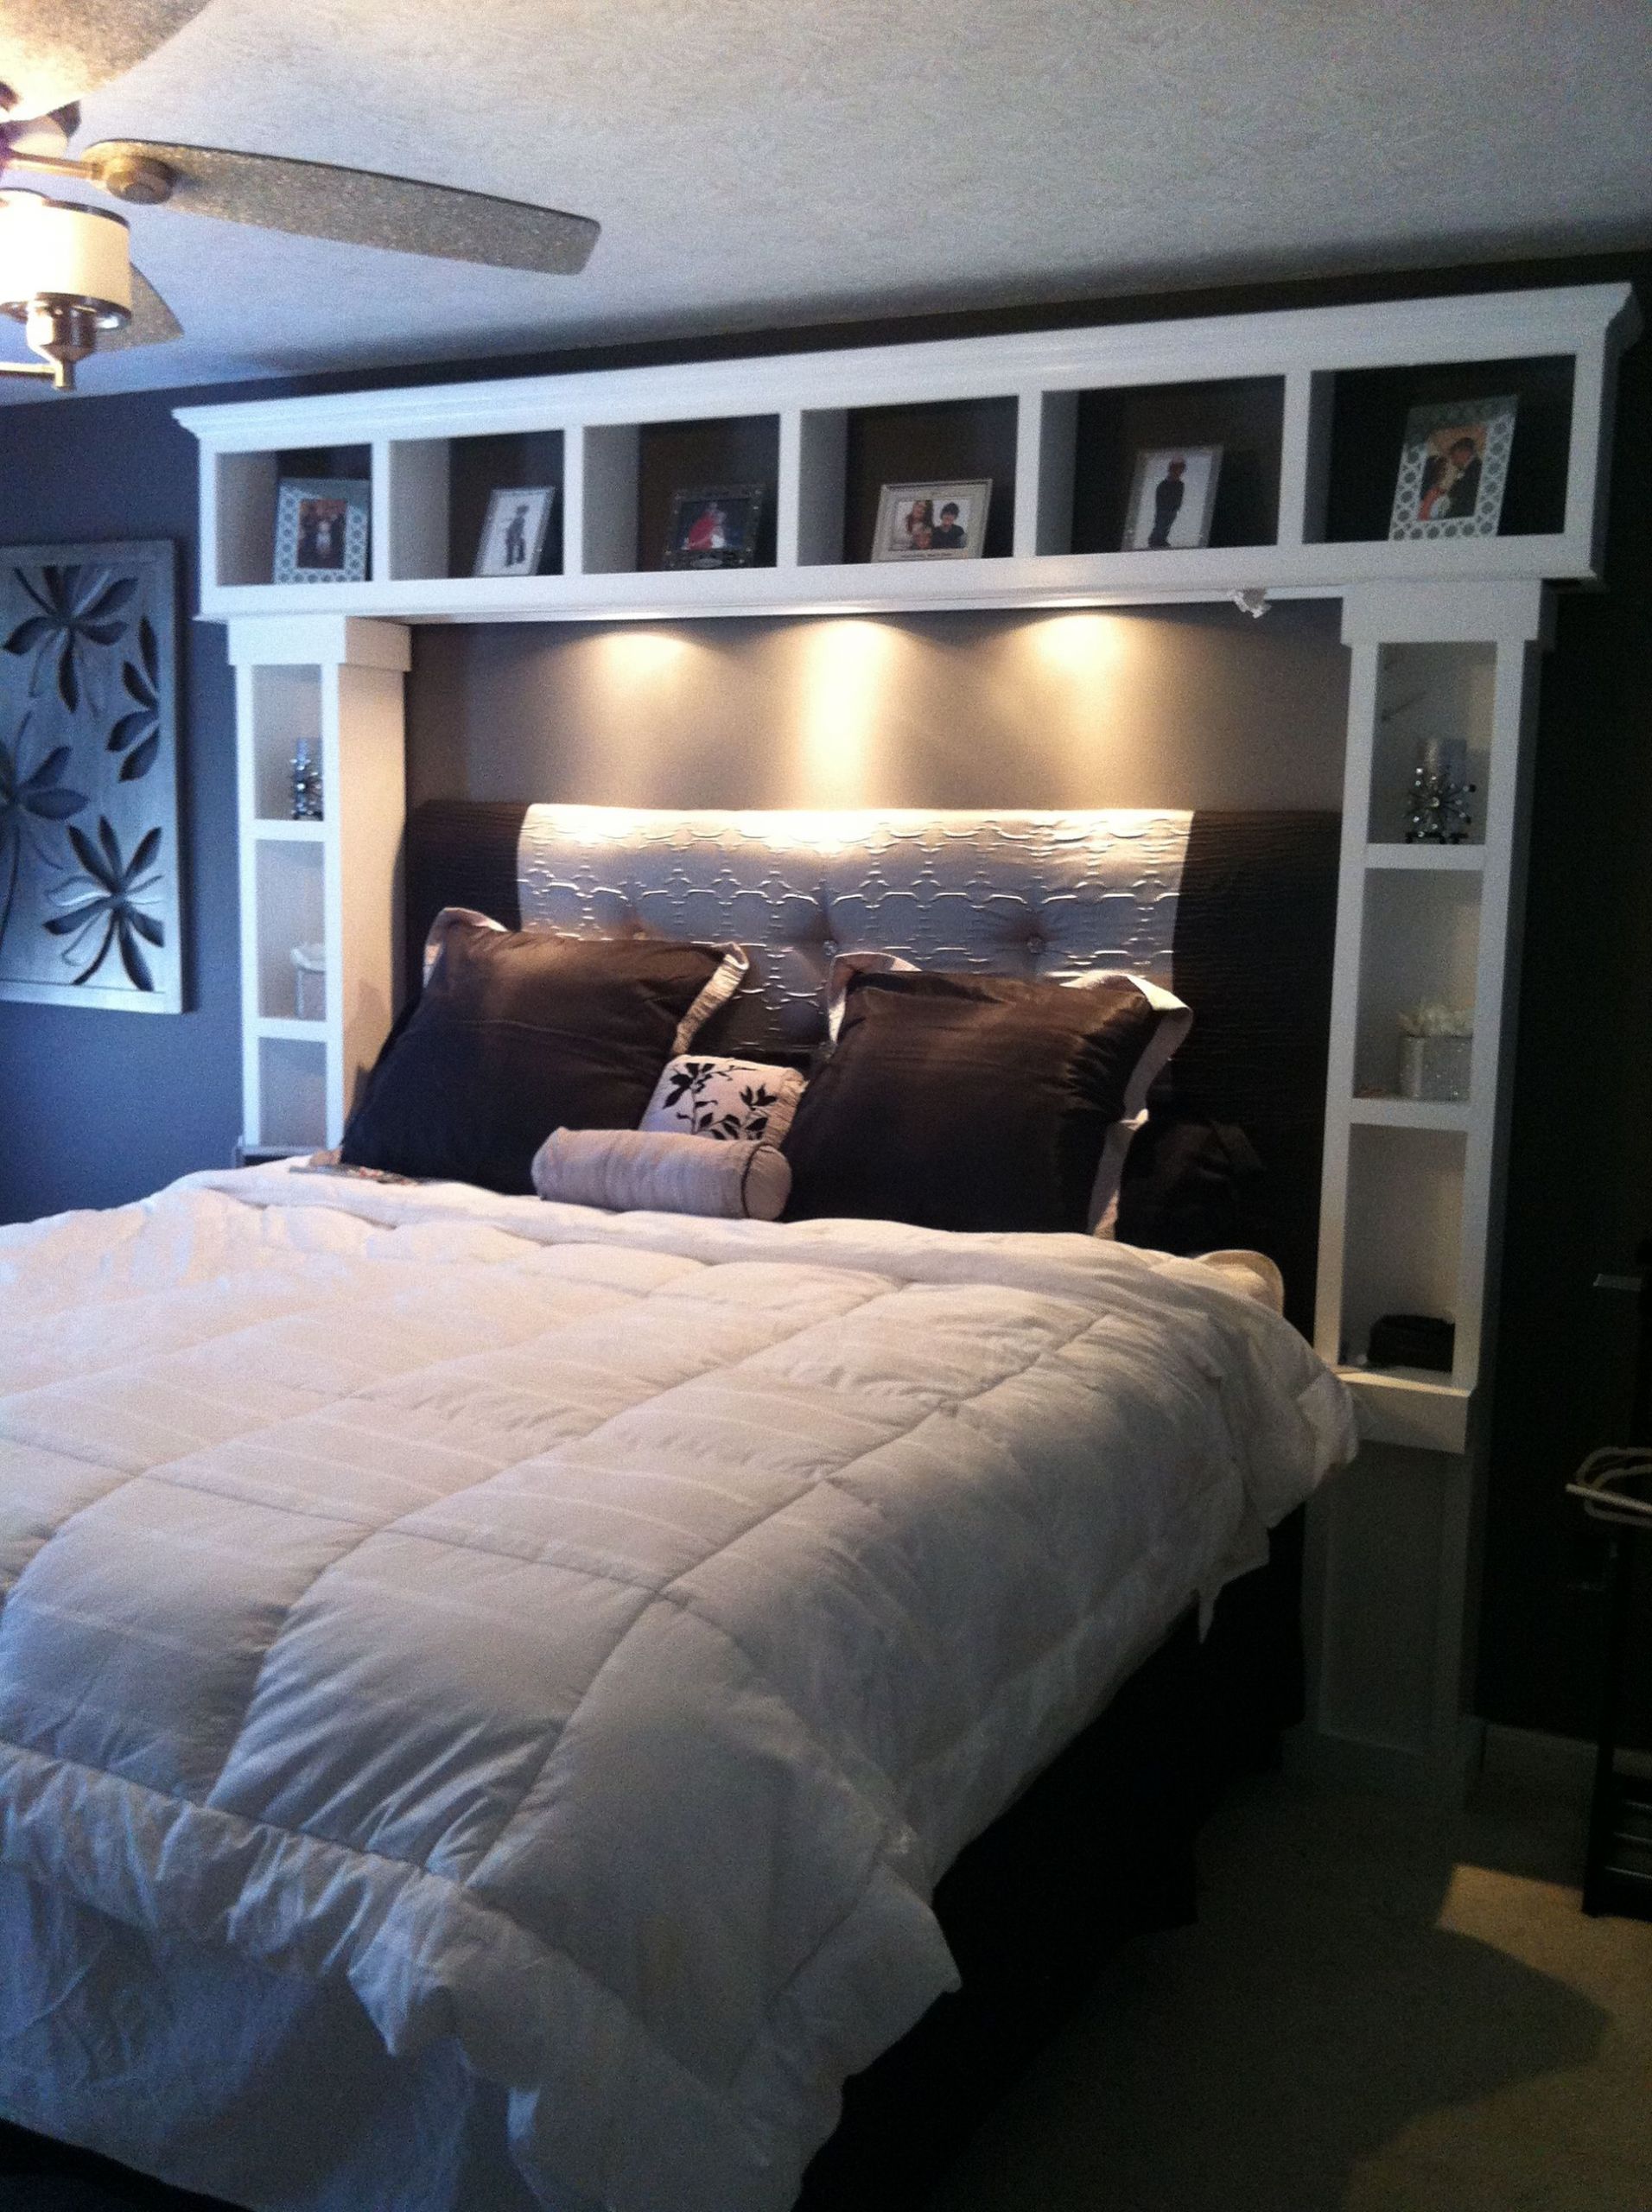 DIY Wood Headboard With Shelves
 DIY bed I want these shelves its like our headboard